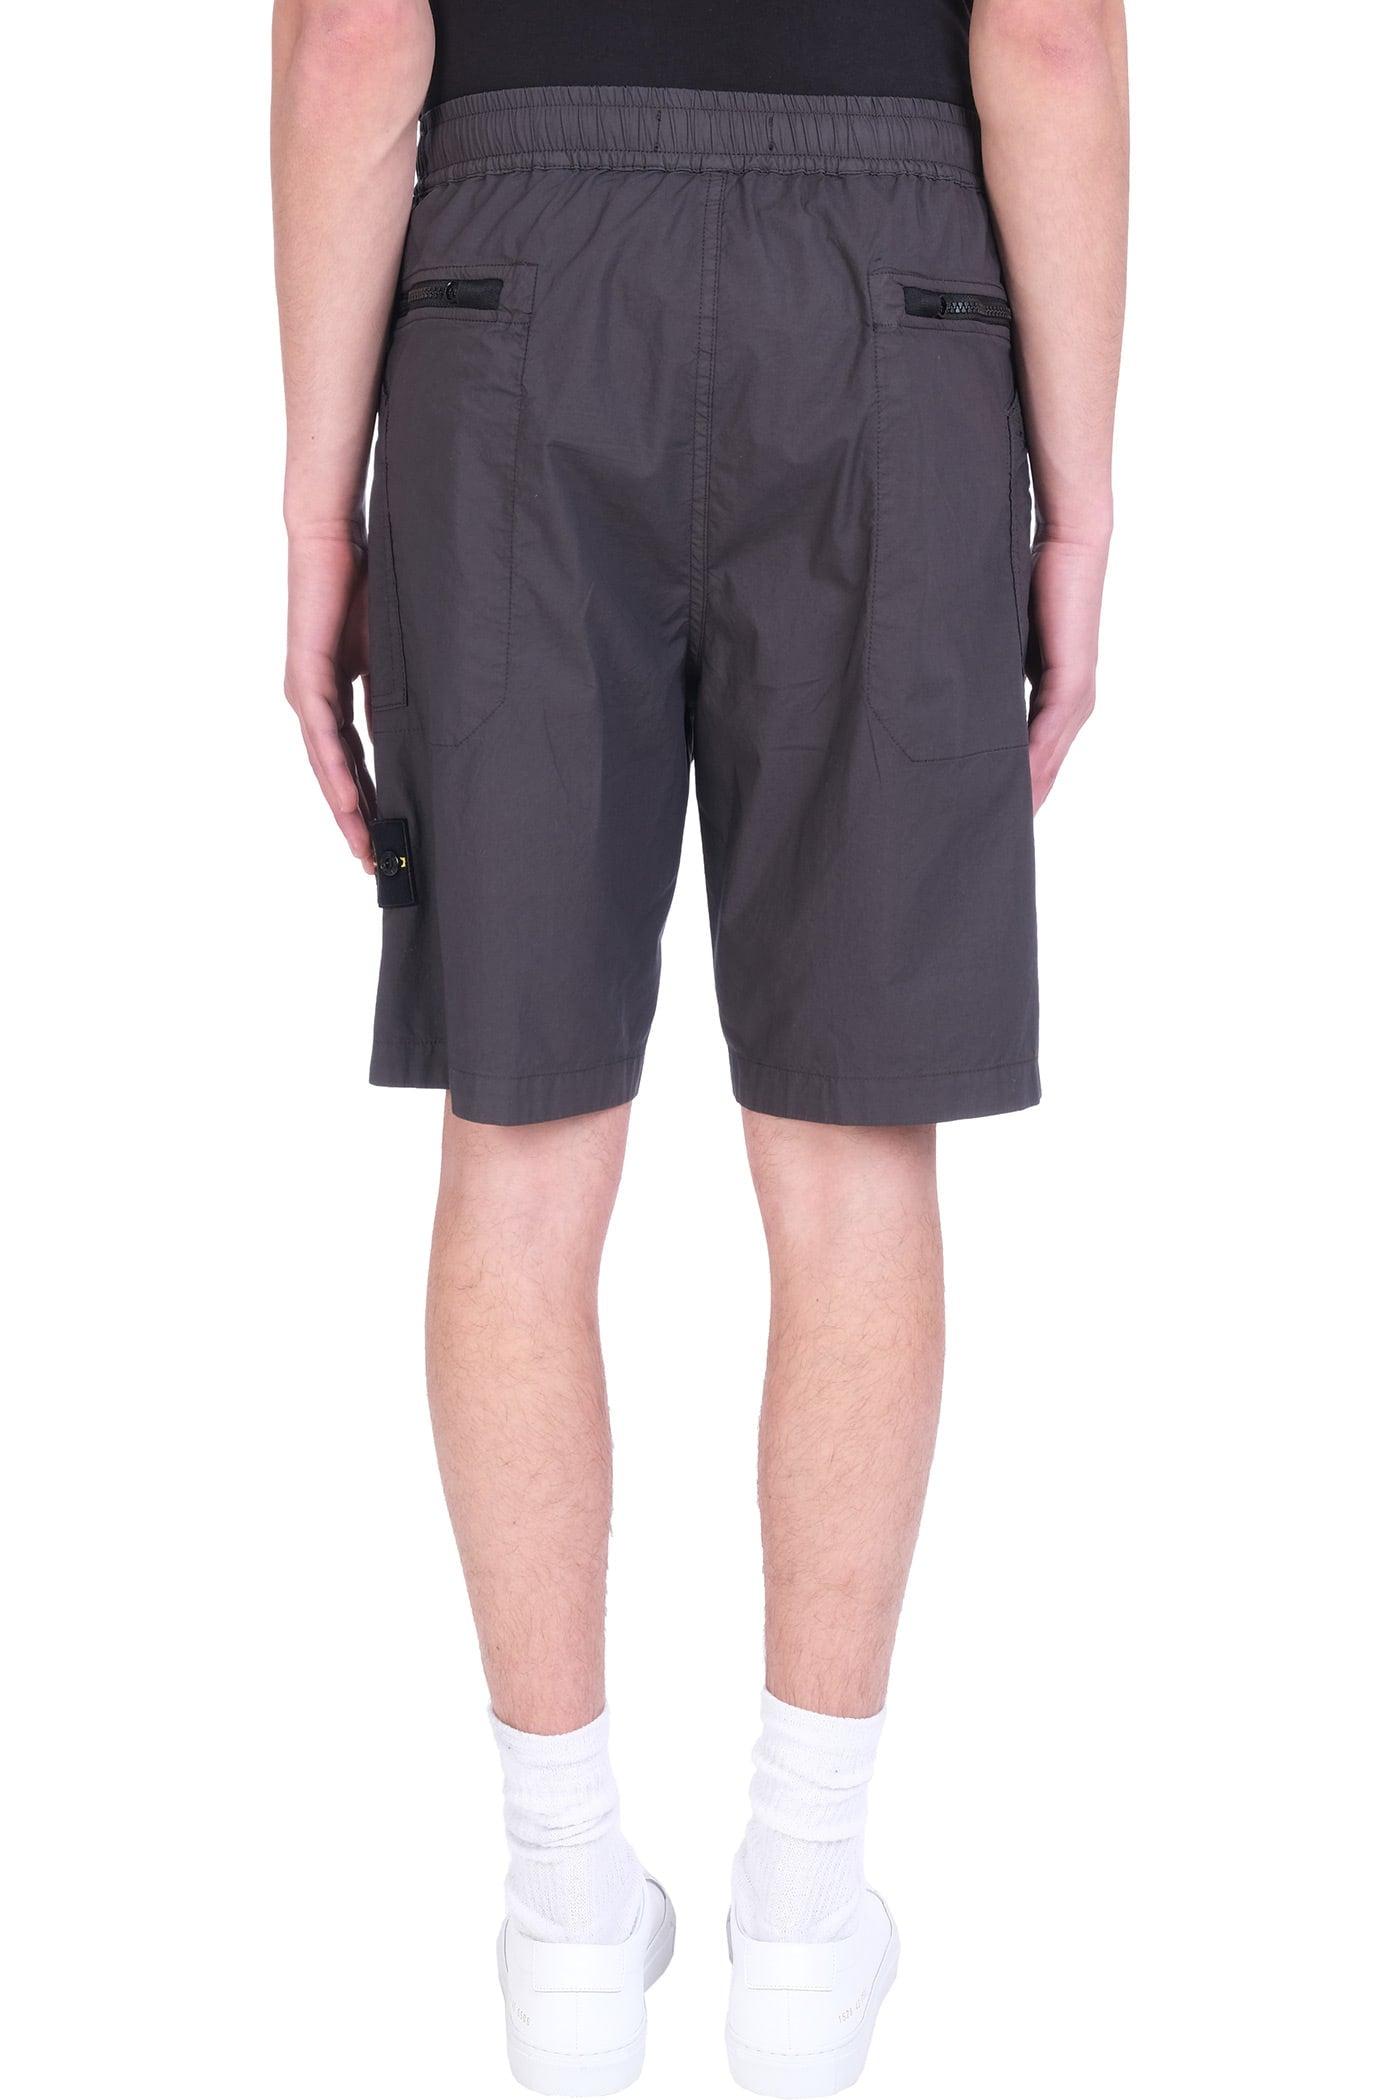 Stone Island Shorts In Cotton in Grey (Gray) for Men - Save 42% | Lyst